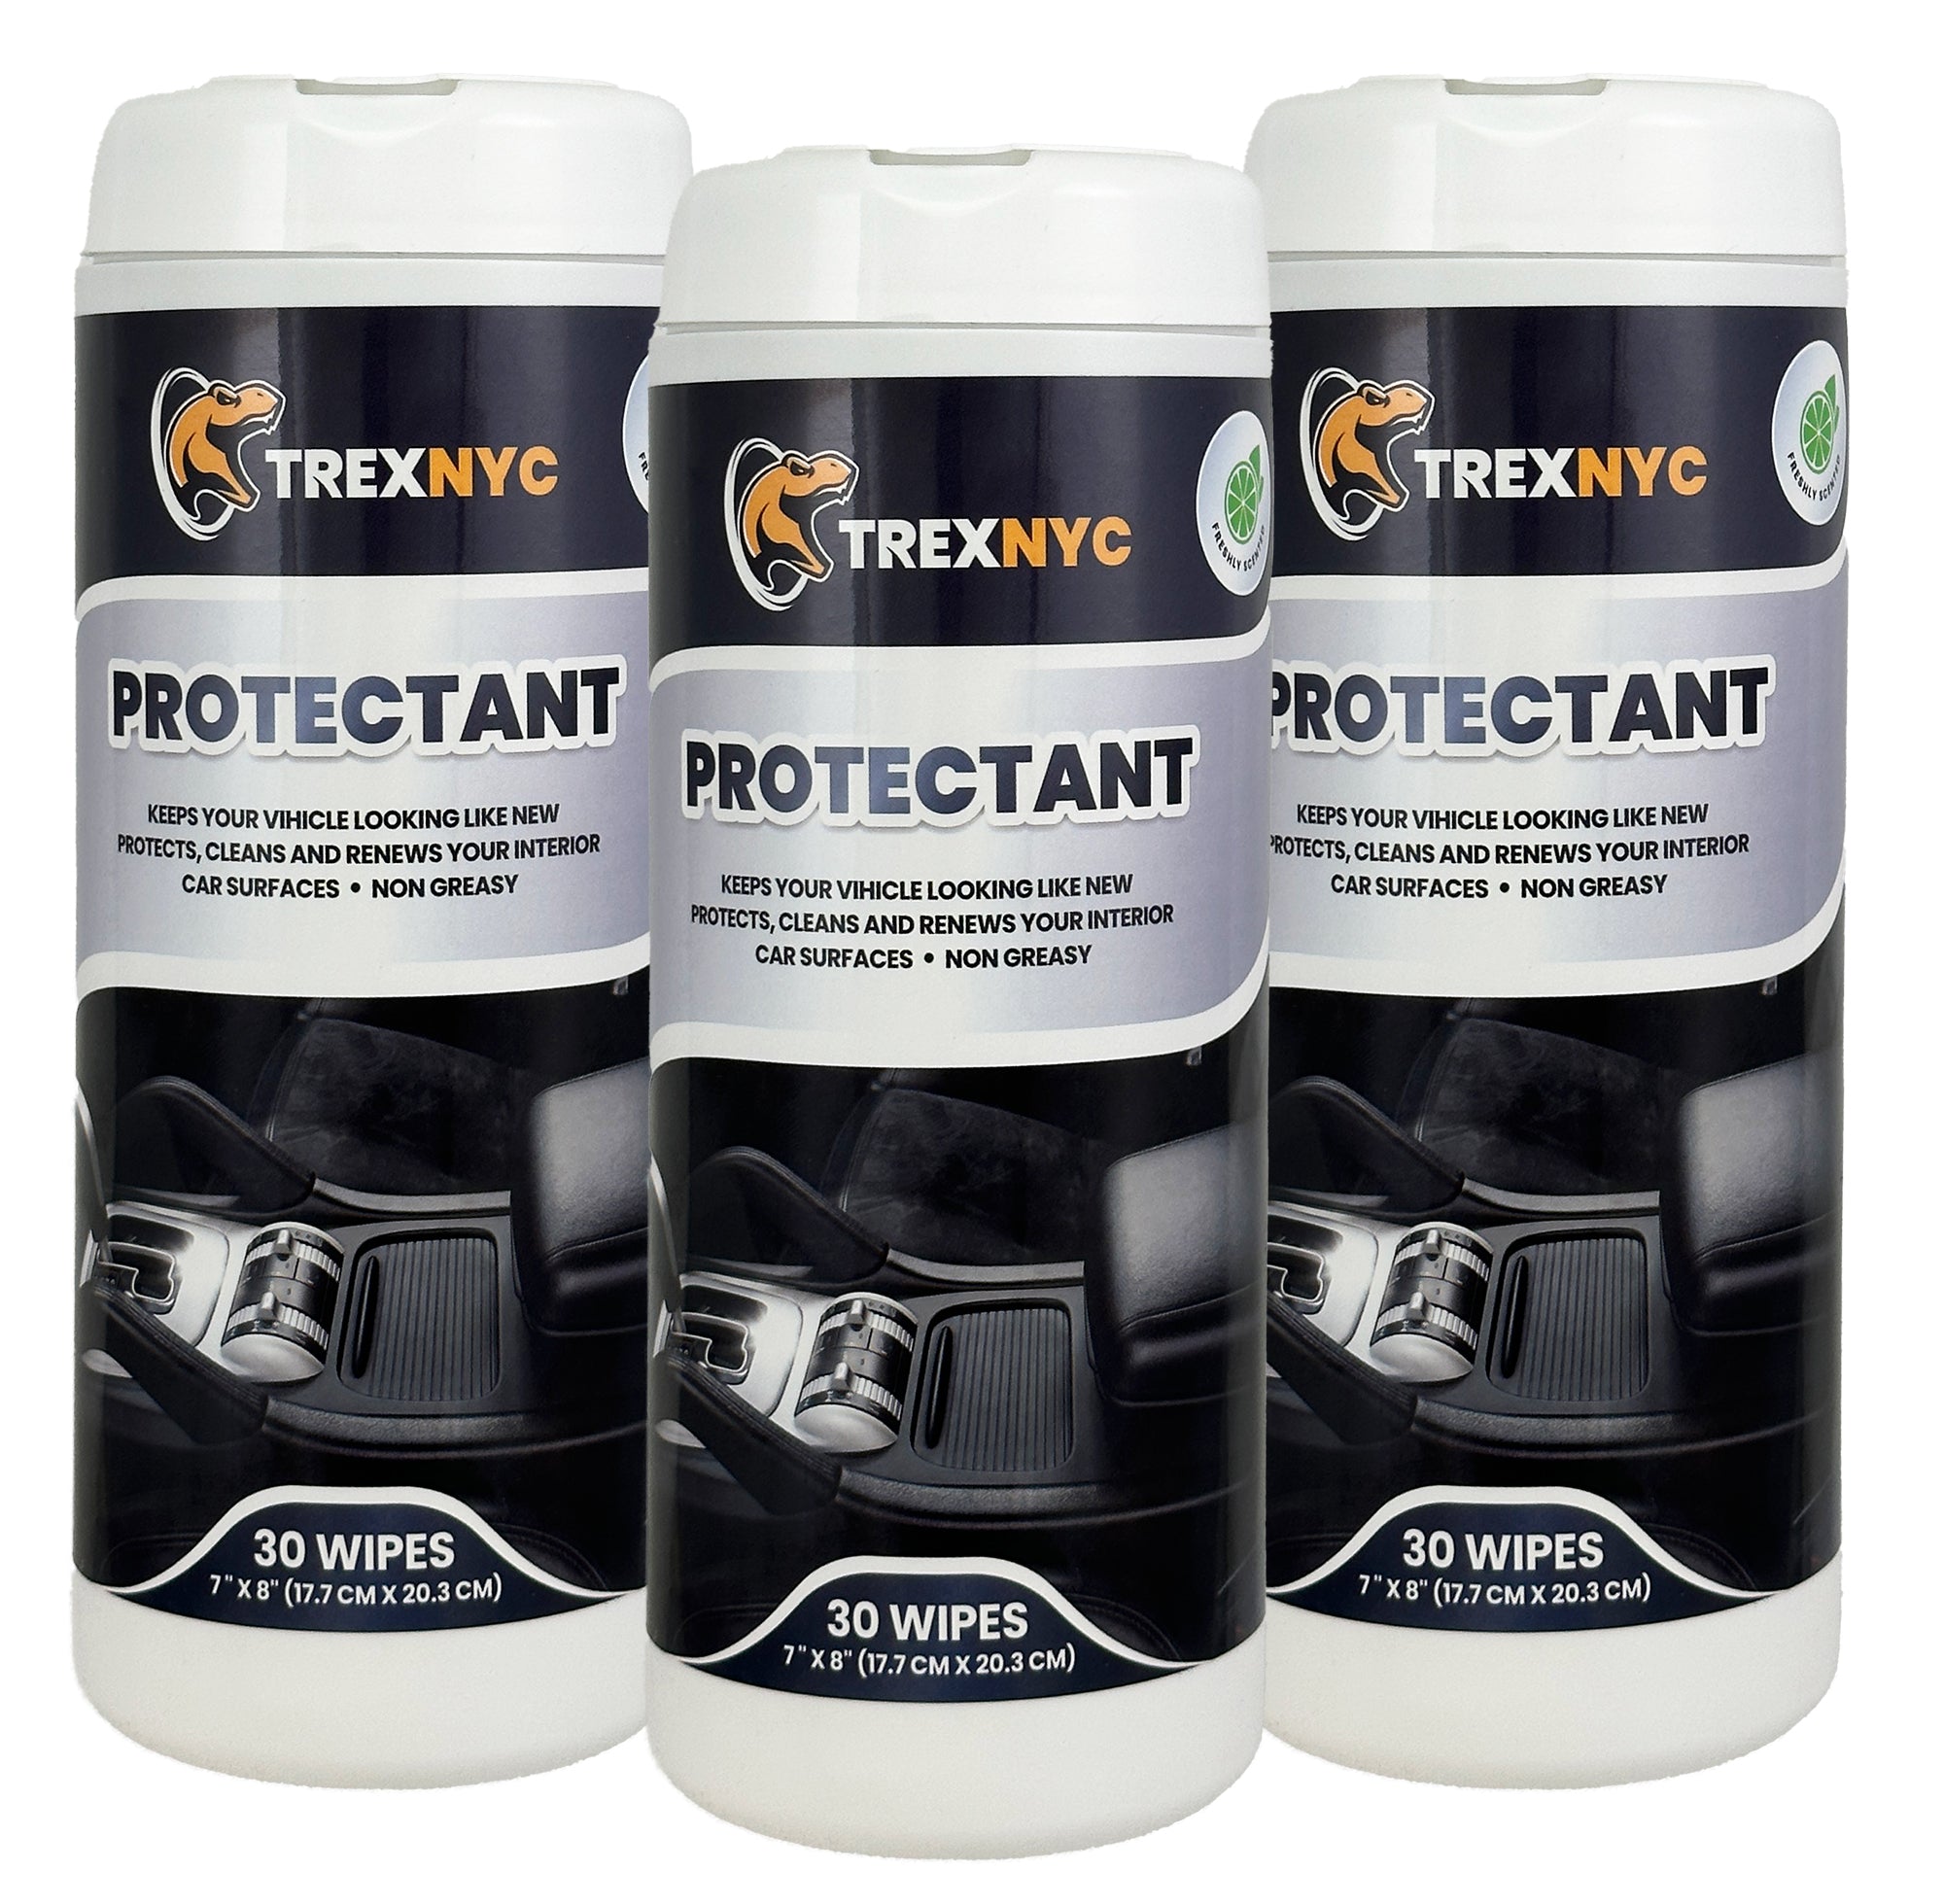 TrexNYC Protectant Wipes, Car Interior Cleaner with UV Protection to  Protect Interior Car Surfaces and Fight Cracking & Fading, 3 Packs by GOSO  Direct